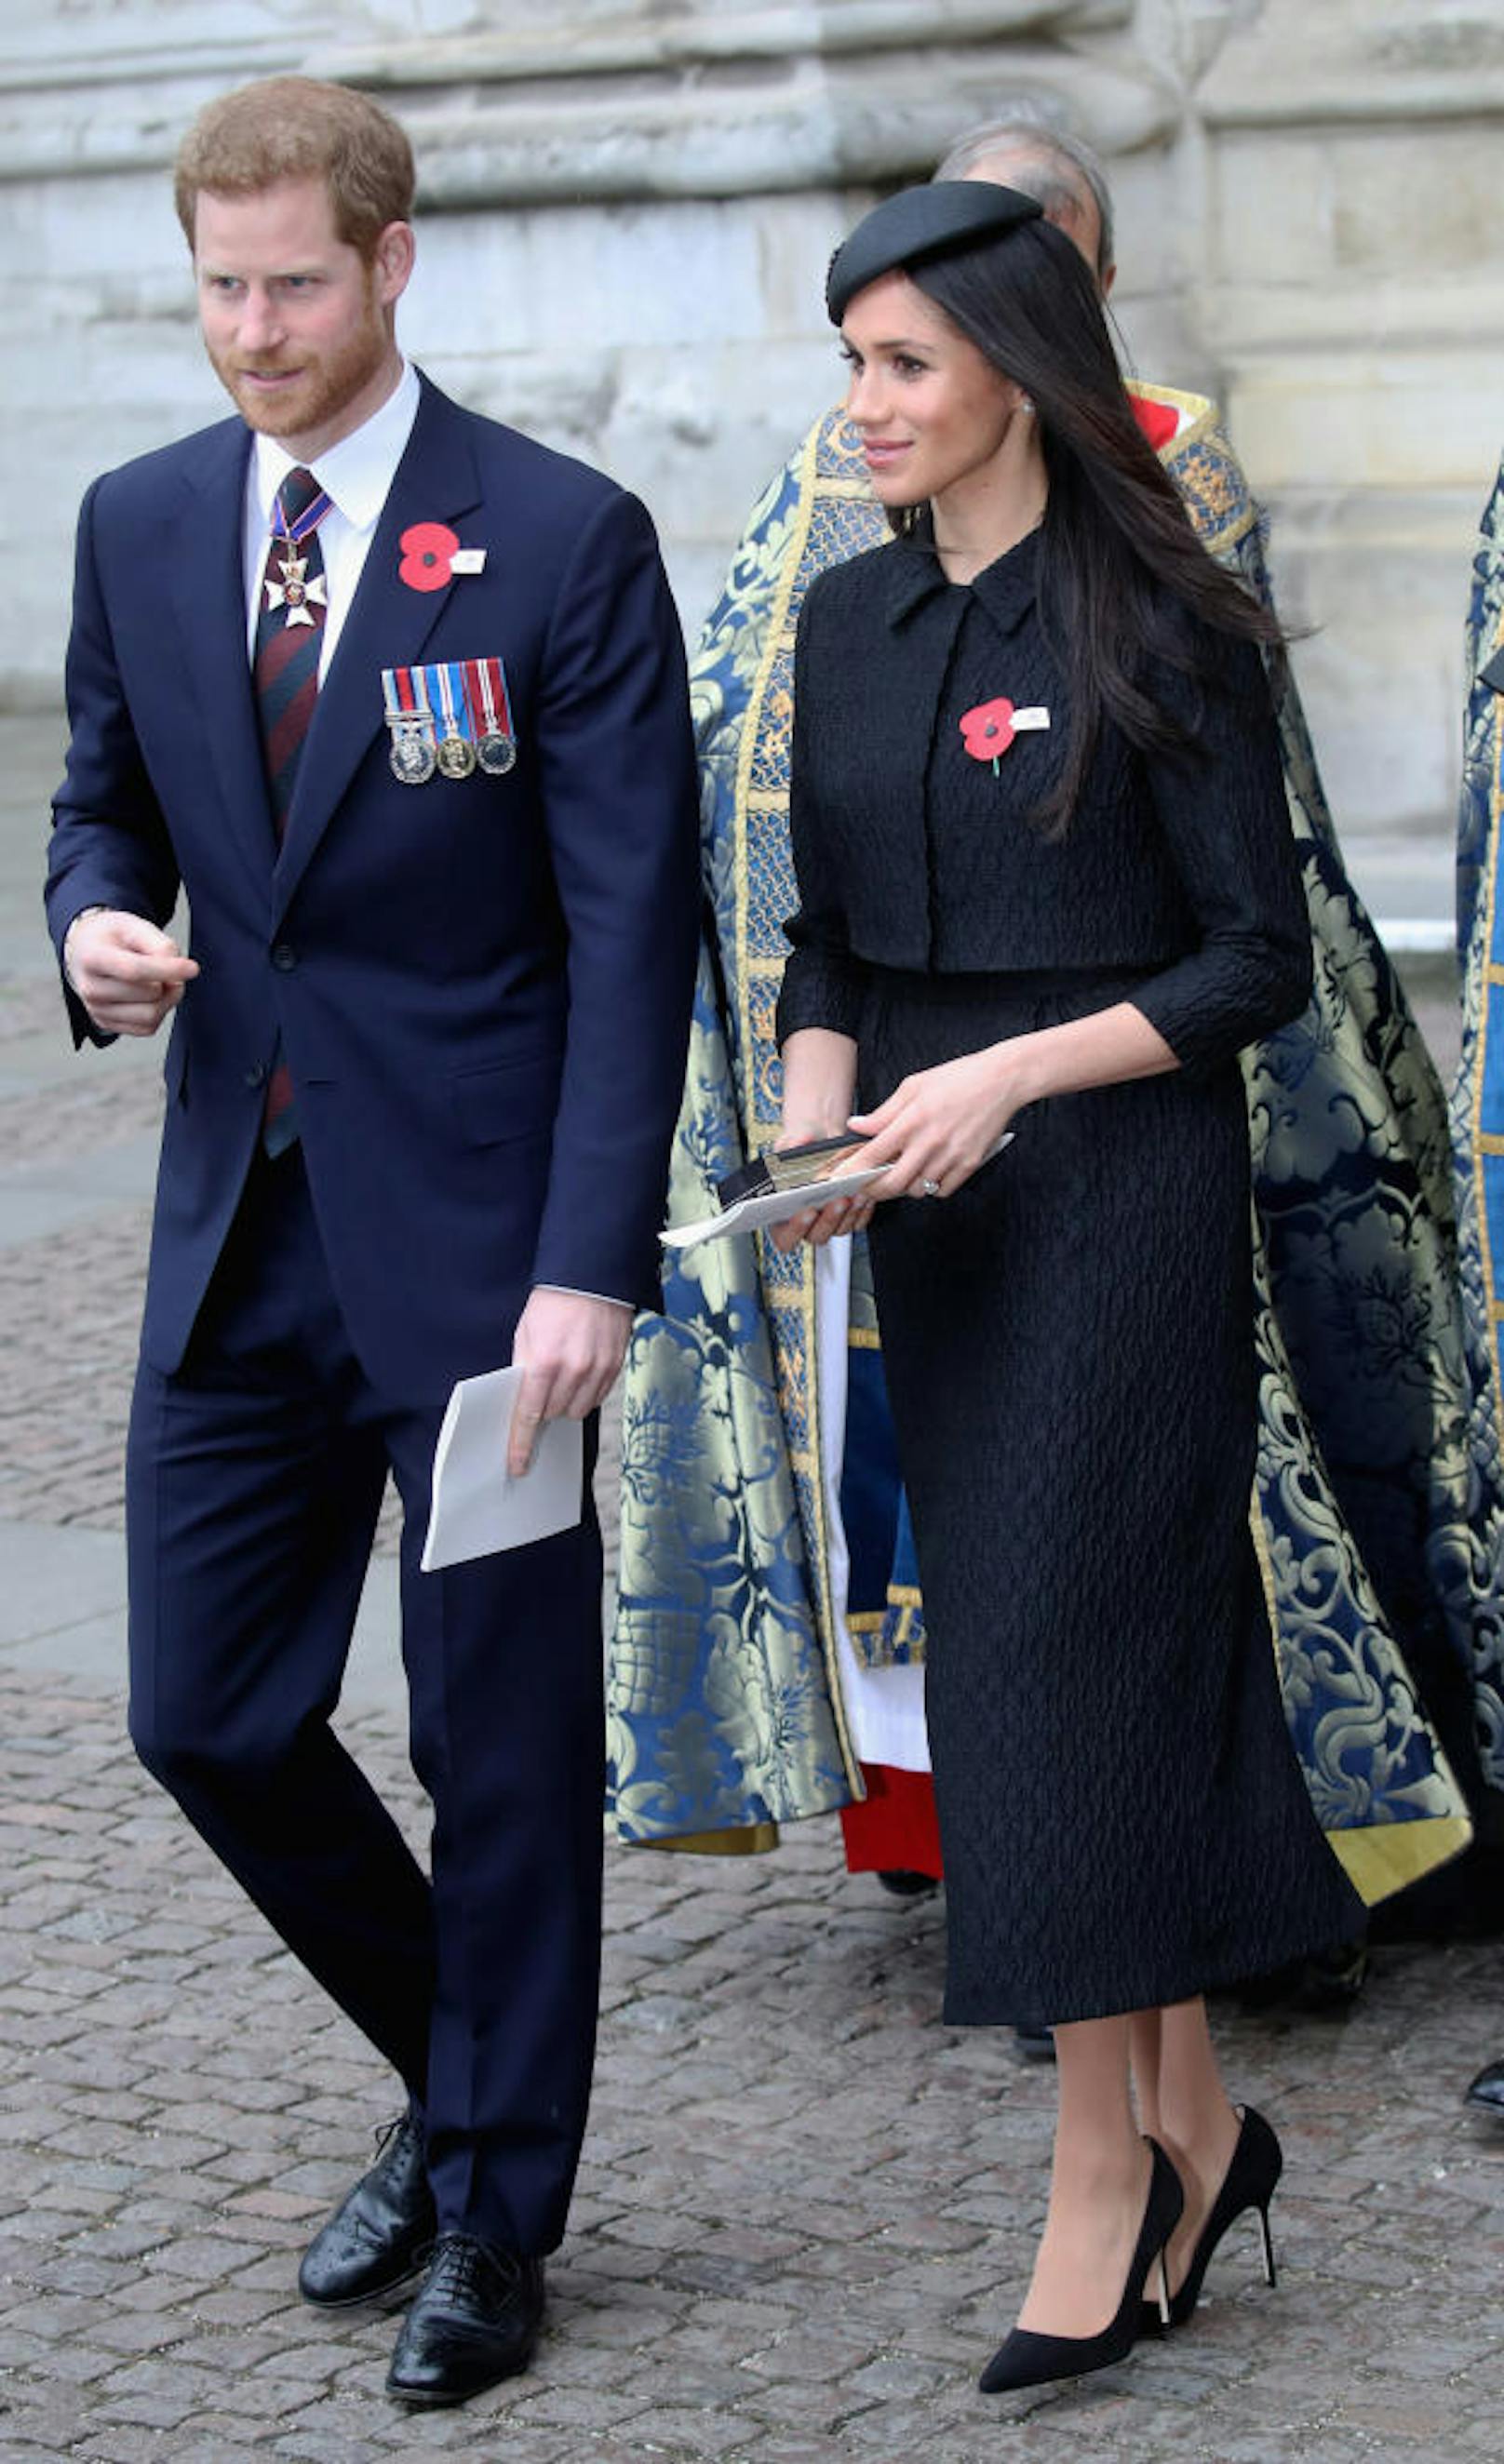 Prince Harry and Meghan Markle attend an Anzac Day Service of Commemoration and Thanksgiving at Westminster Abbey on April 25, 2018 in London, England. Anzac Day commemorates Australian and New Zealand casualties and veterans of conflicts and marks the anniversary of the landings in the Dardanelles on April 25, 1915 that would signal the start of the Gallipoli Campaign during the First World War.